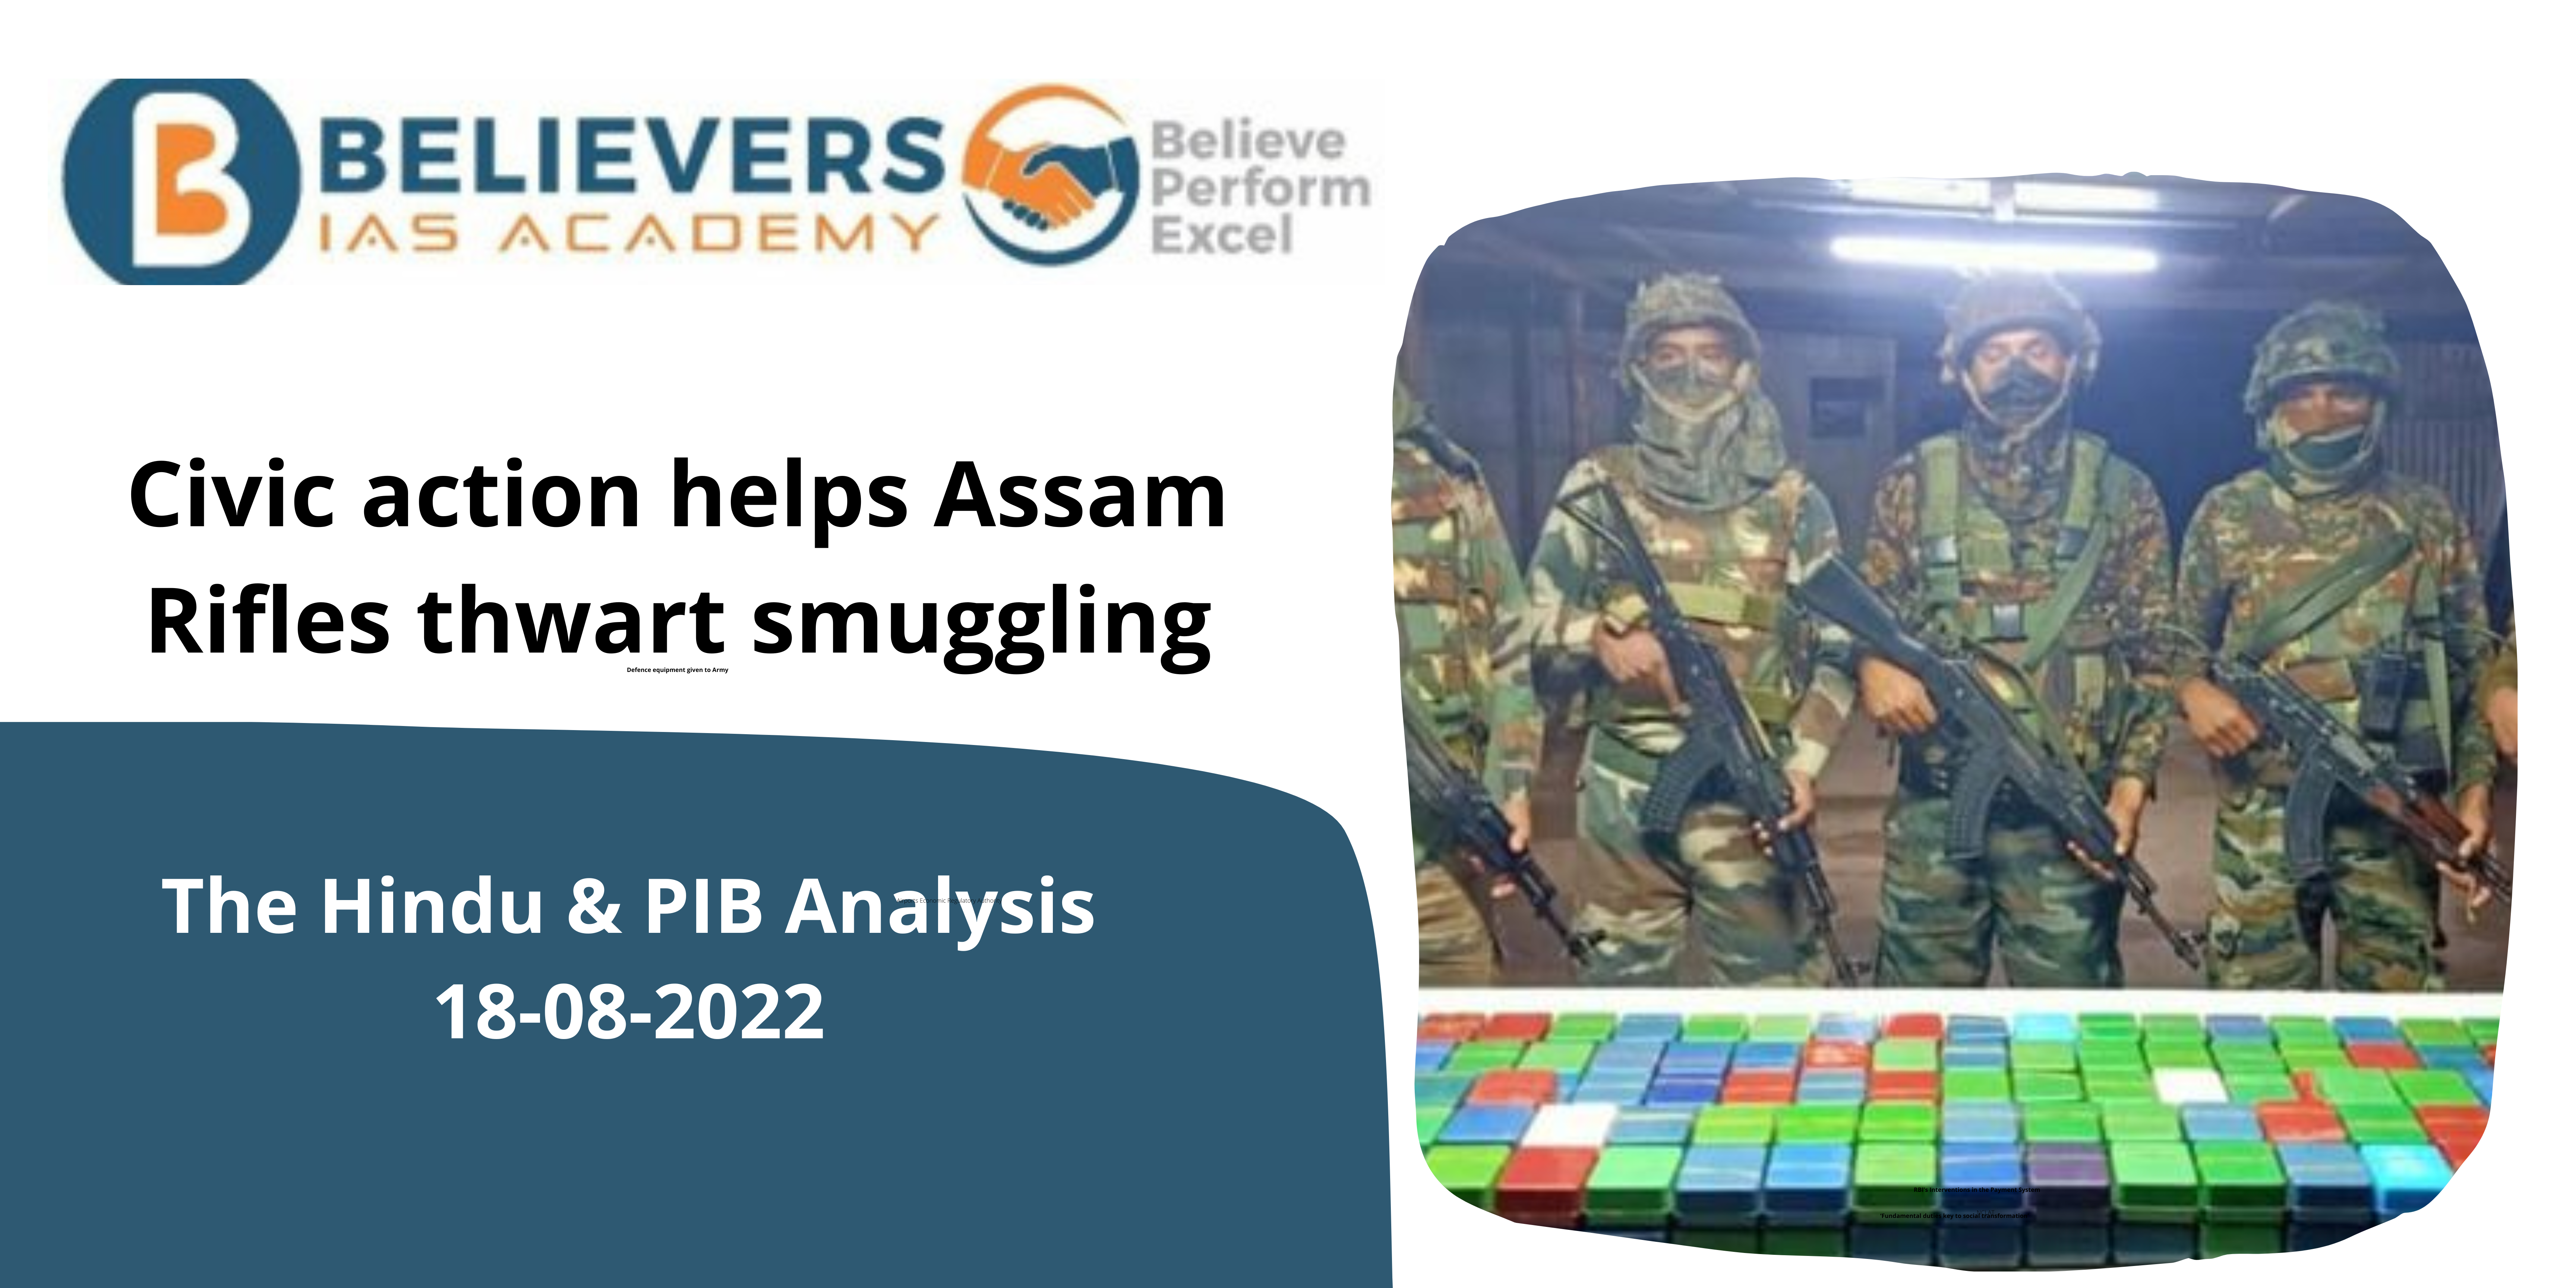 Civic action helps Assam Rifles thwart smuggling